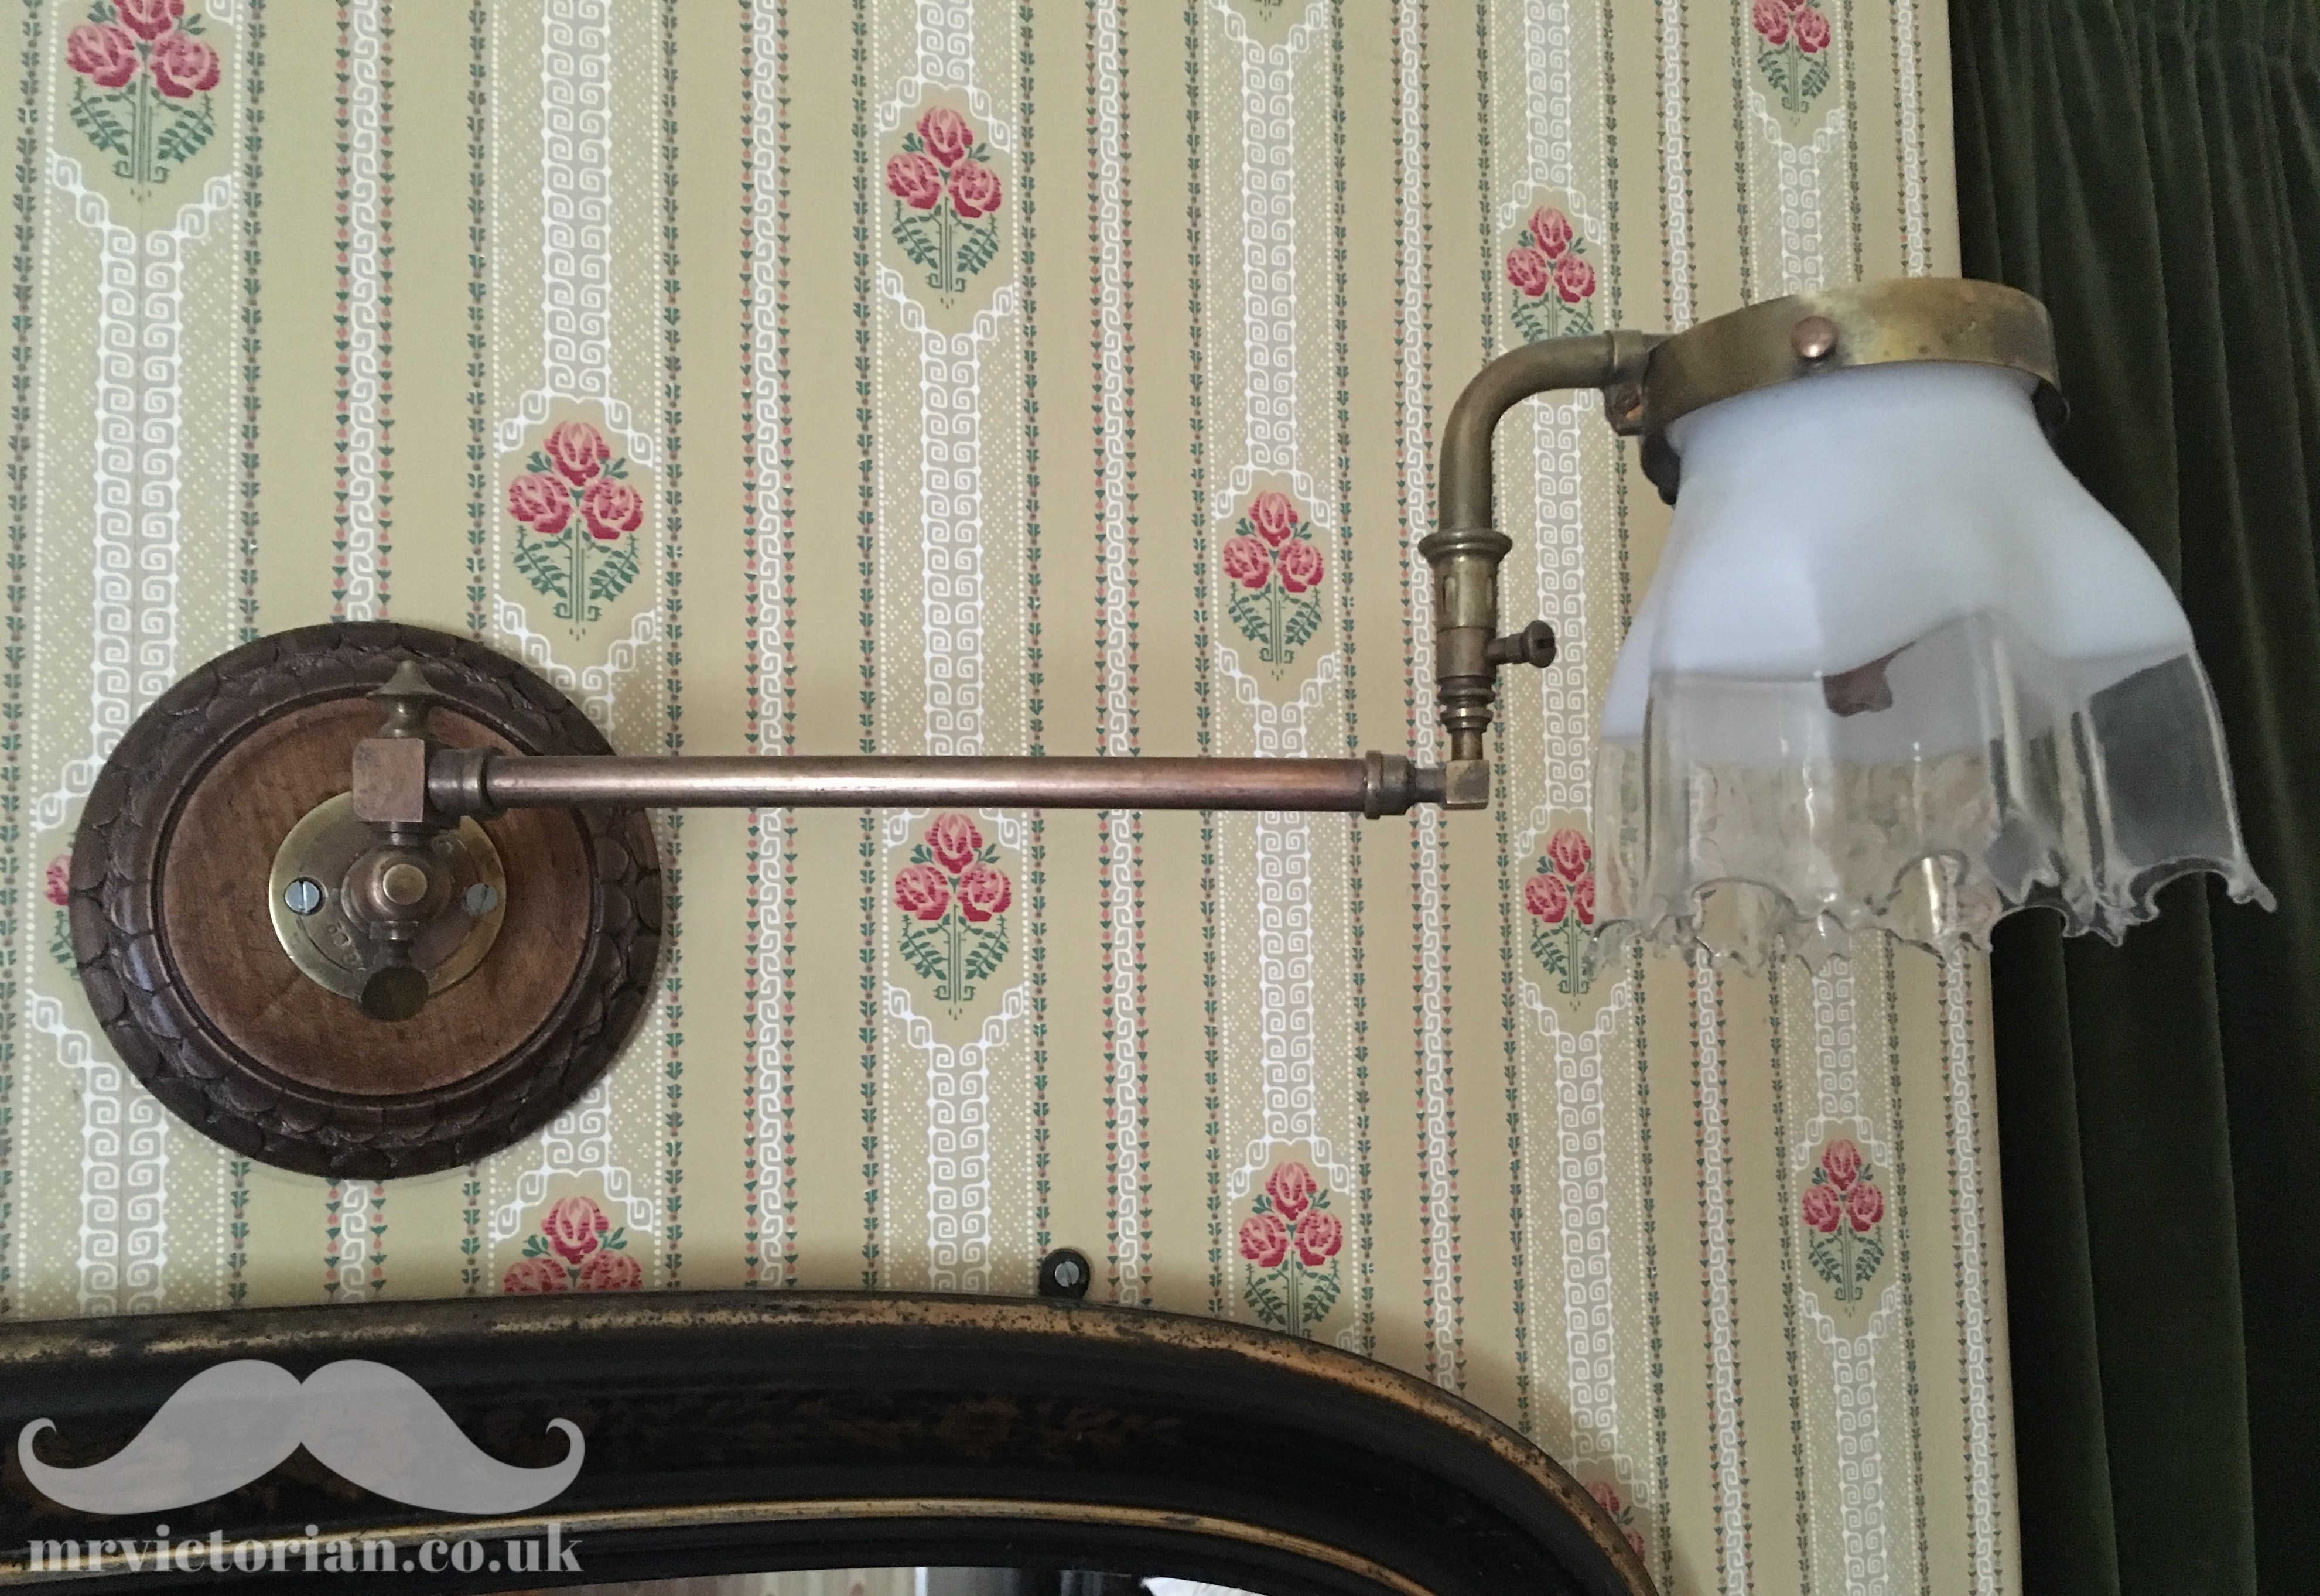 Antique lighting - Victorian upright gas light lamp with downlight convertor